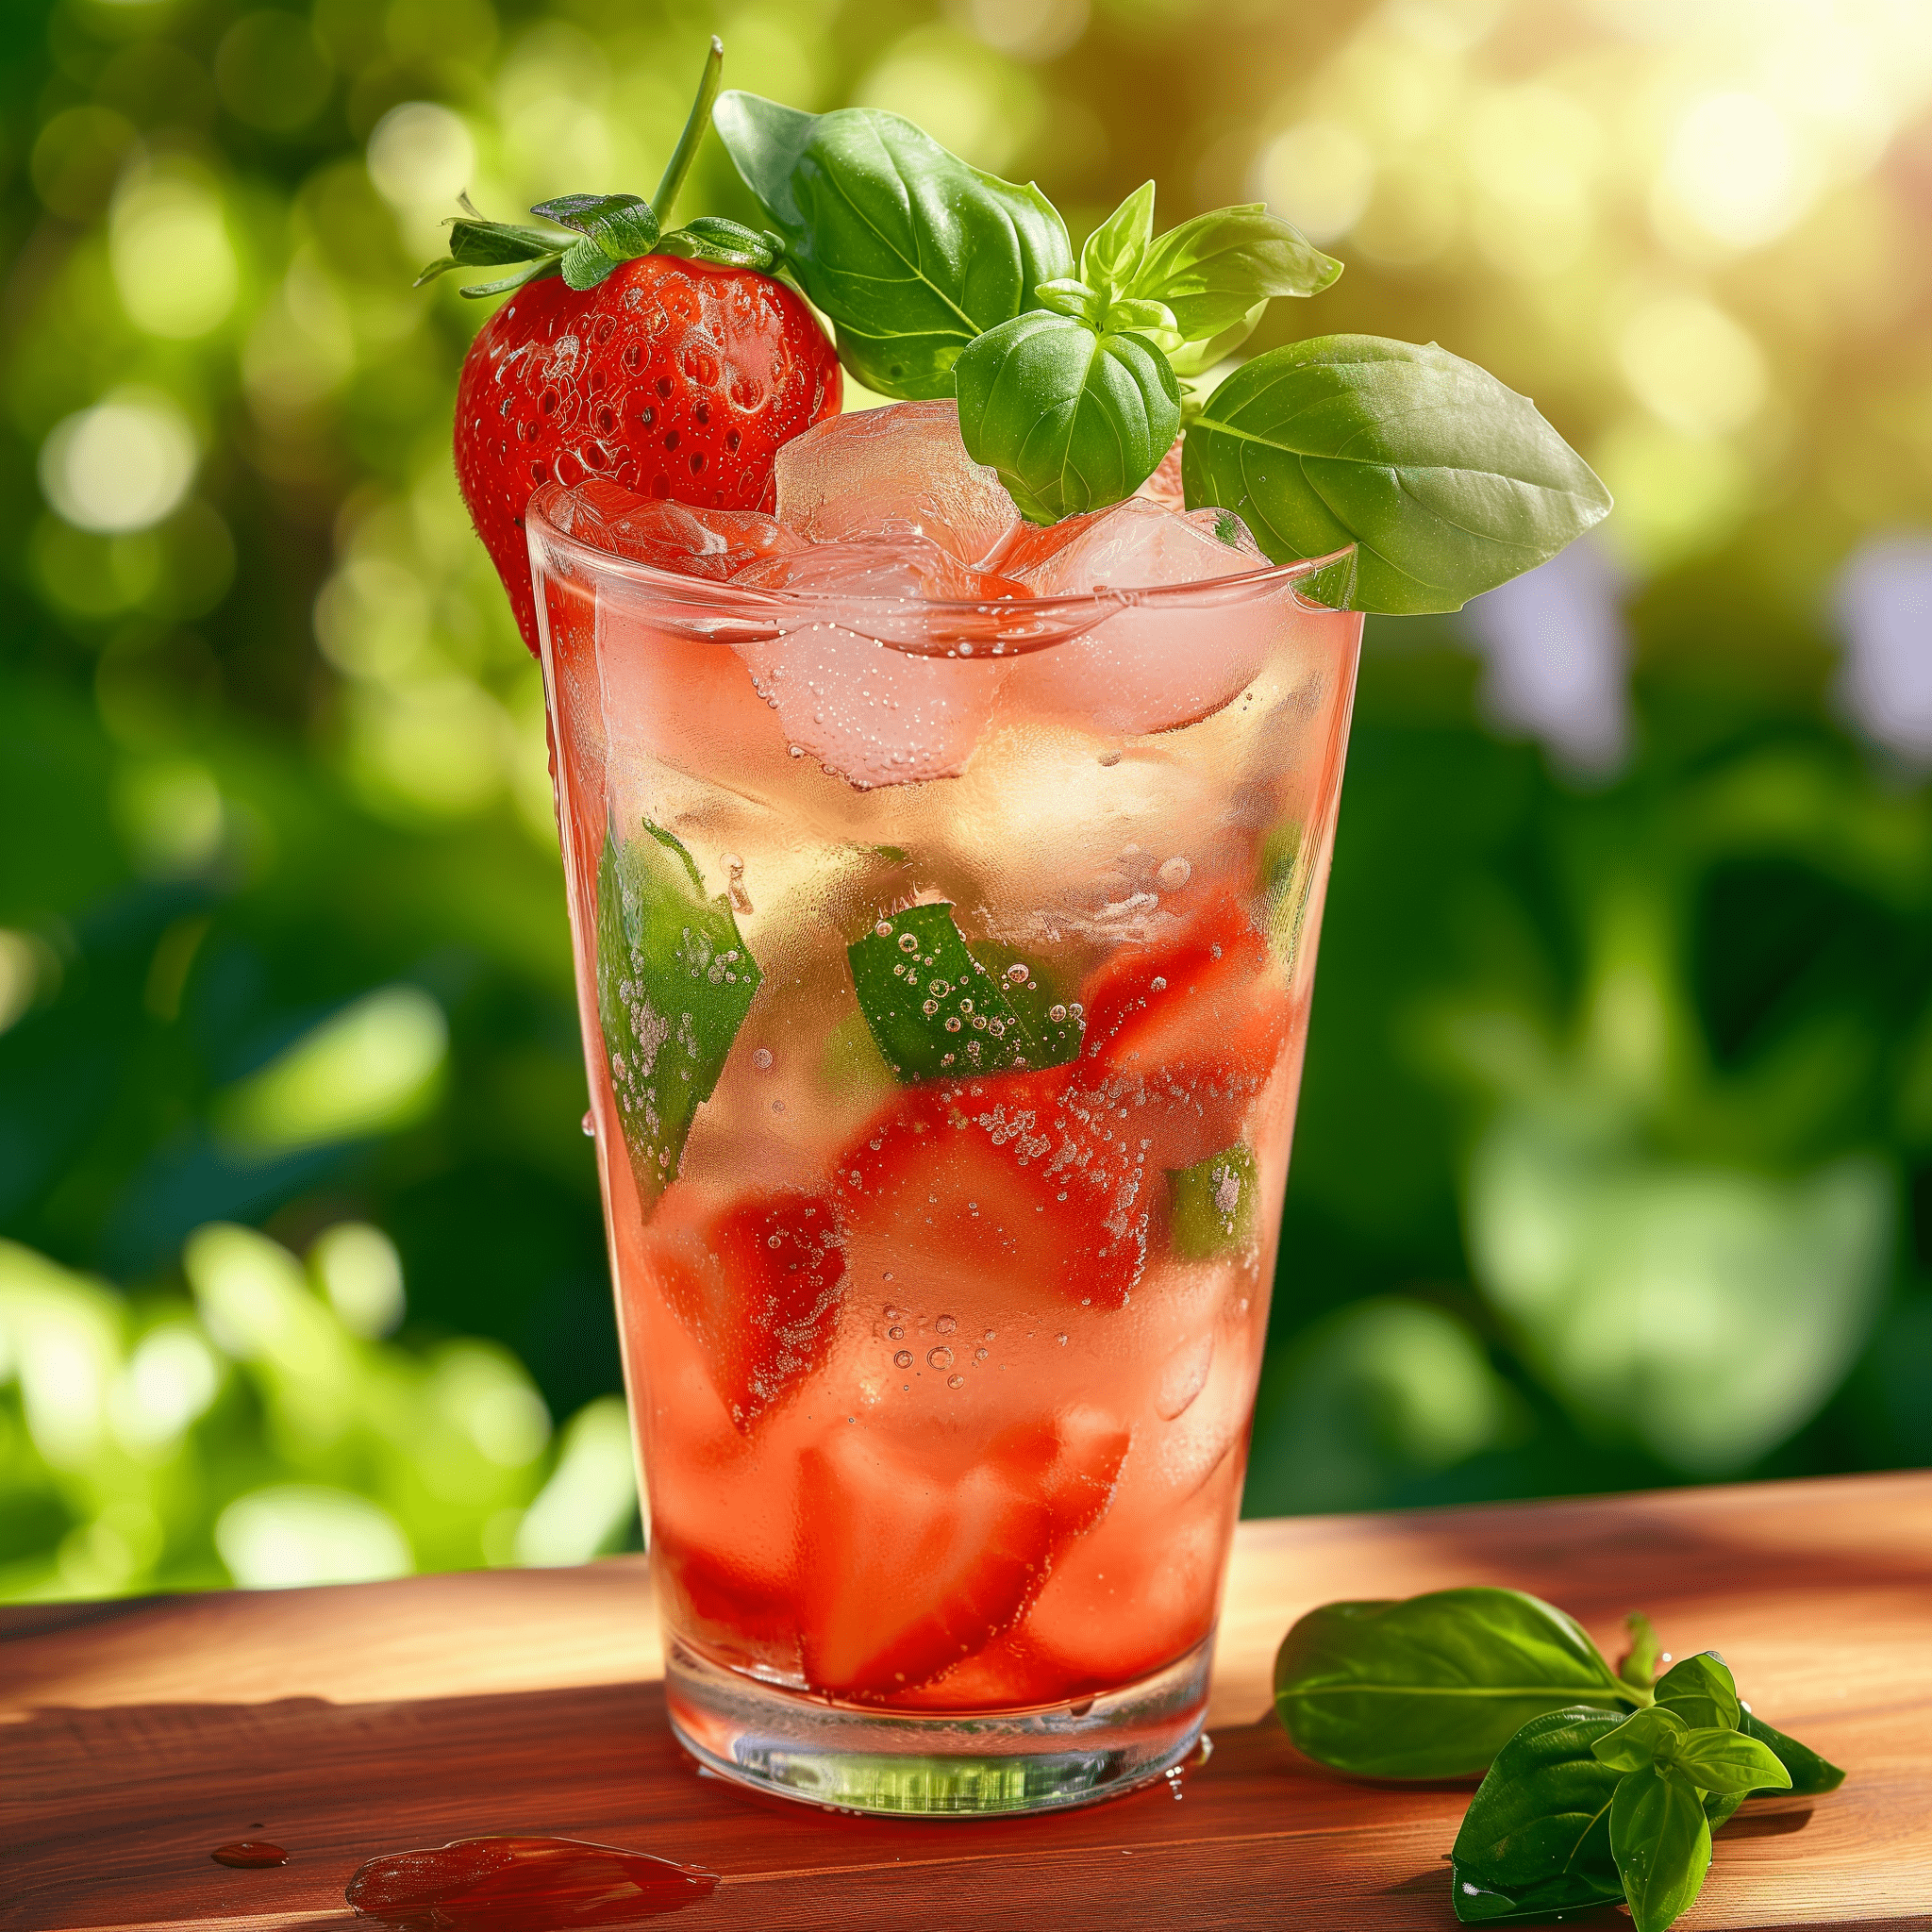 Strawberry Basil Mocktail Recipe - This mocktail offers a delightful balance of sweet and tangy flavors, with the ripe strawberries providing a juicy, fruity base complemented by the subtle peppery hint of fresh basil. The addition of lemon juice adds a zesty kick, while the simple syrup rounds out the drink with a touch of sweetness.